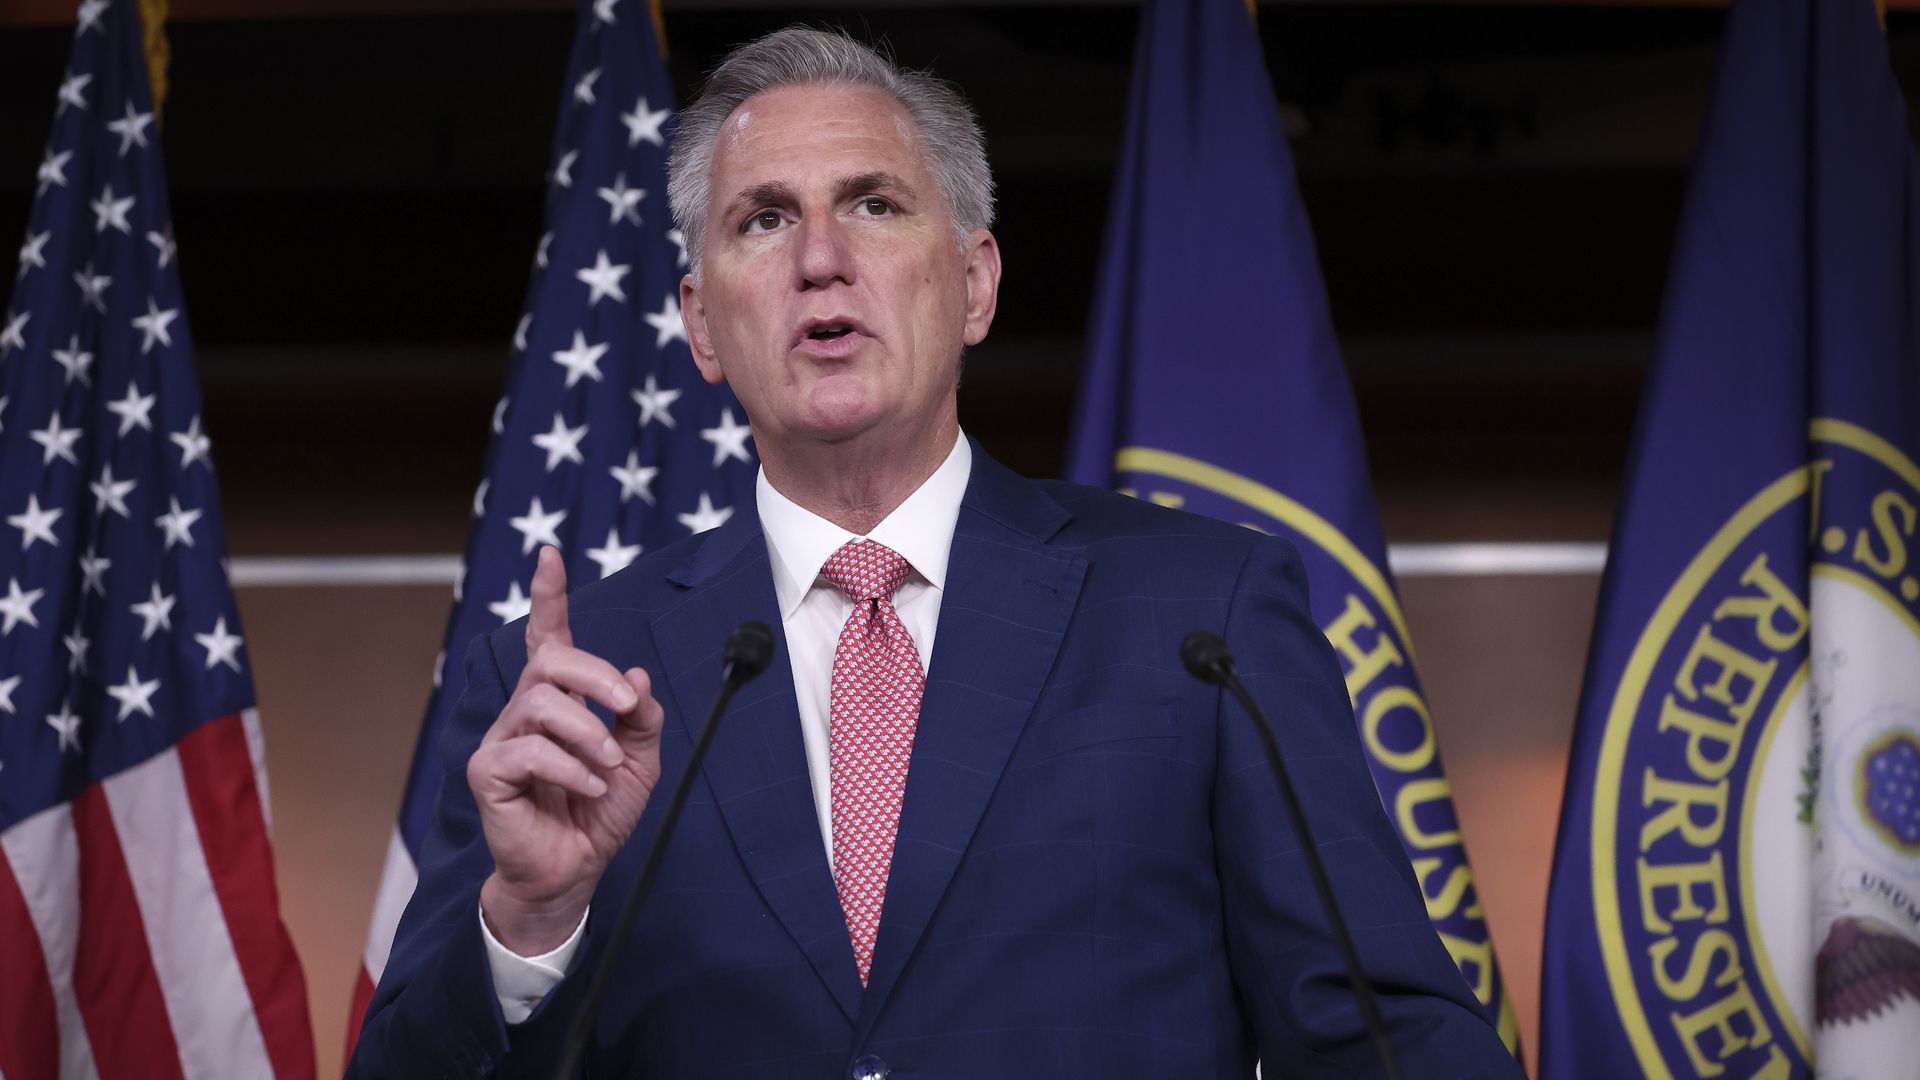 House Minority Leader Kevin McCarthy (R-CA) answers questions during a press conference at the U.S. Capitol on July 29, 2022 in Washington, DC.